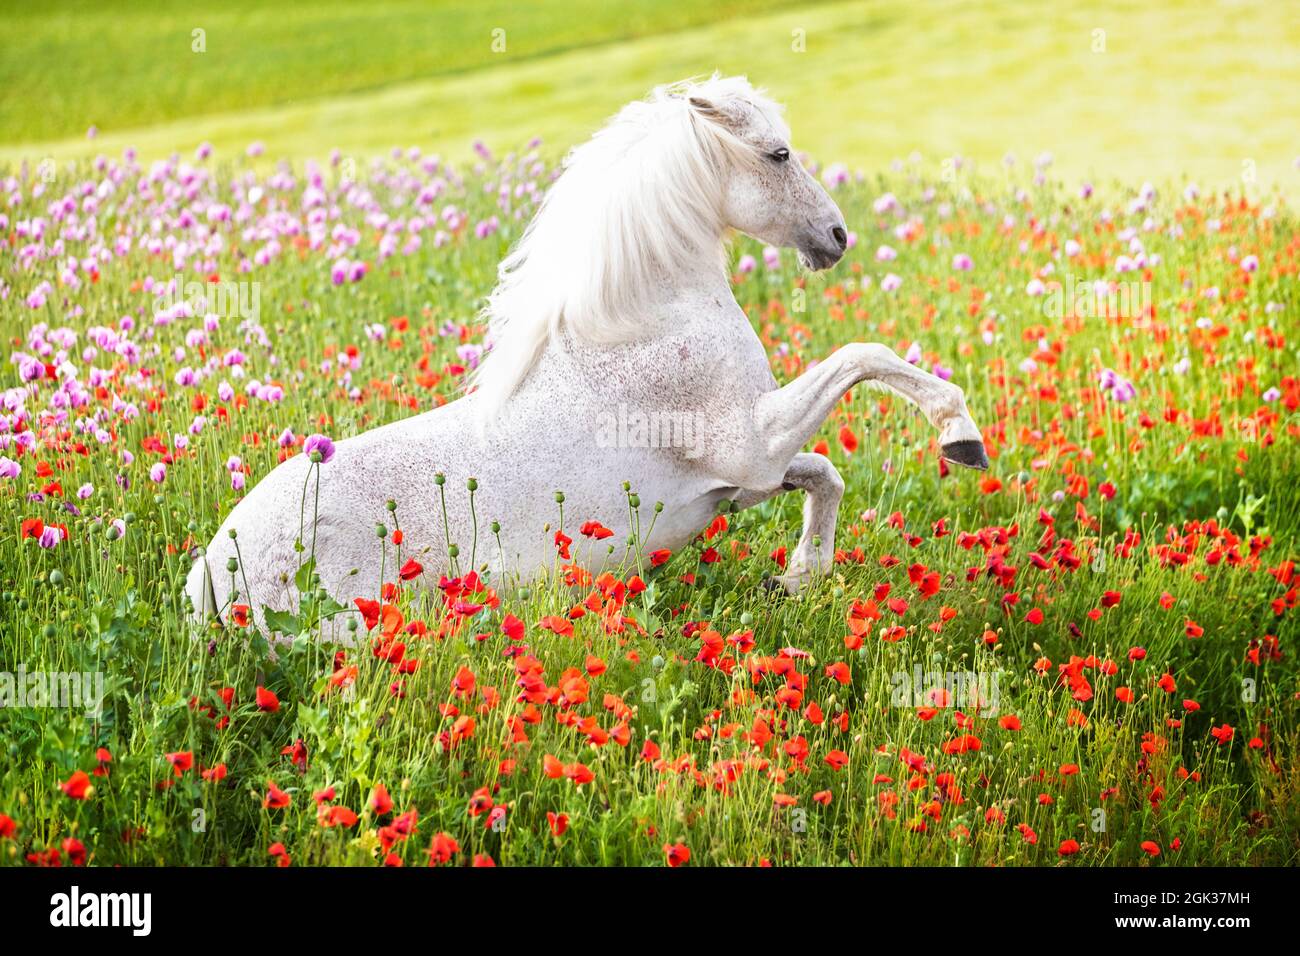 Pure Spanish Horse, Andalusian. Grey stallion rearing in a field of flowering poppies. Germany Stock Photo